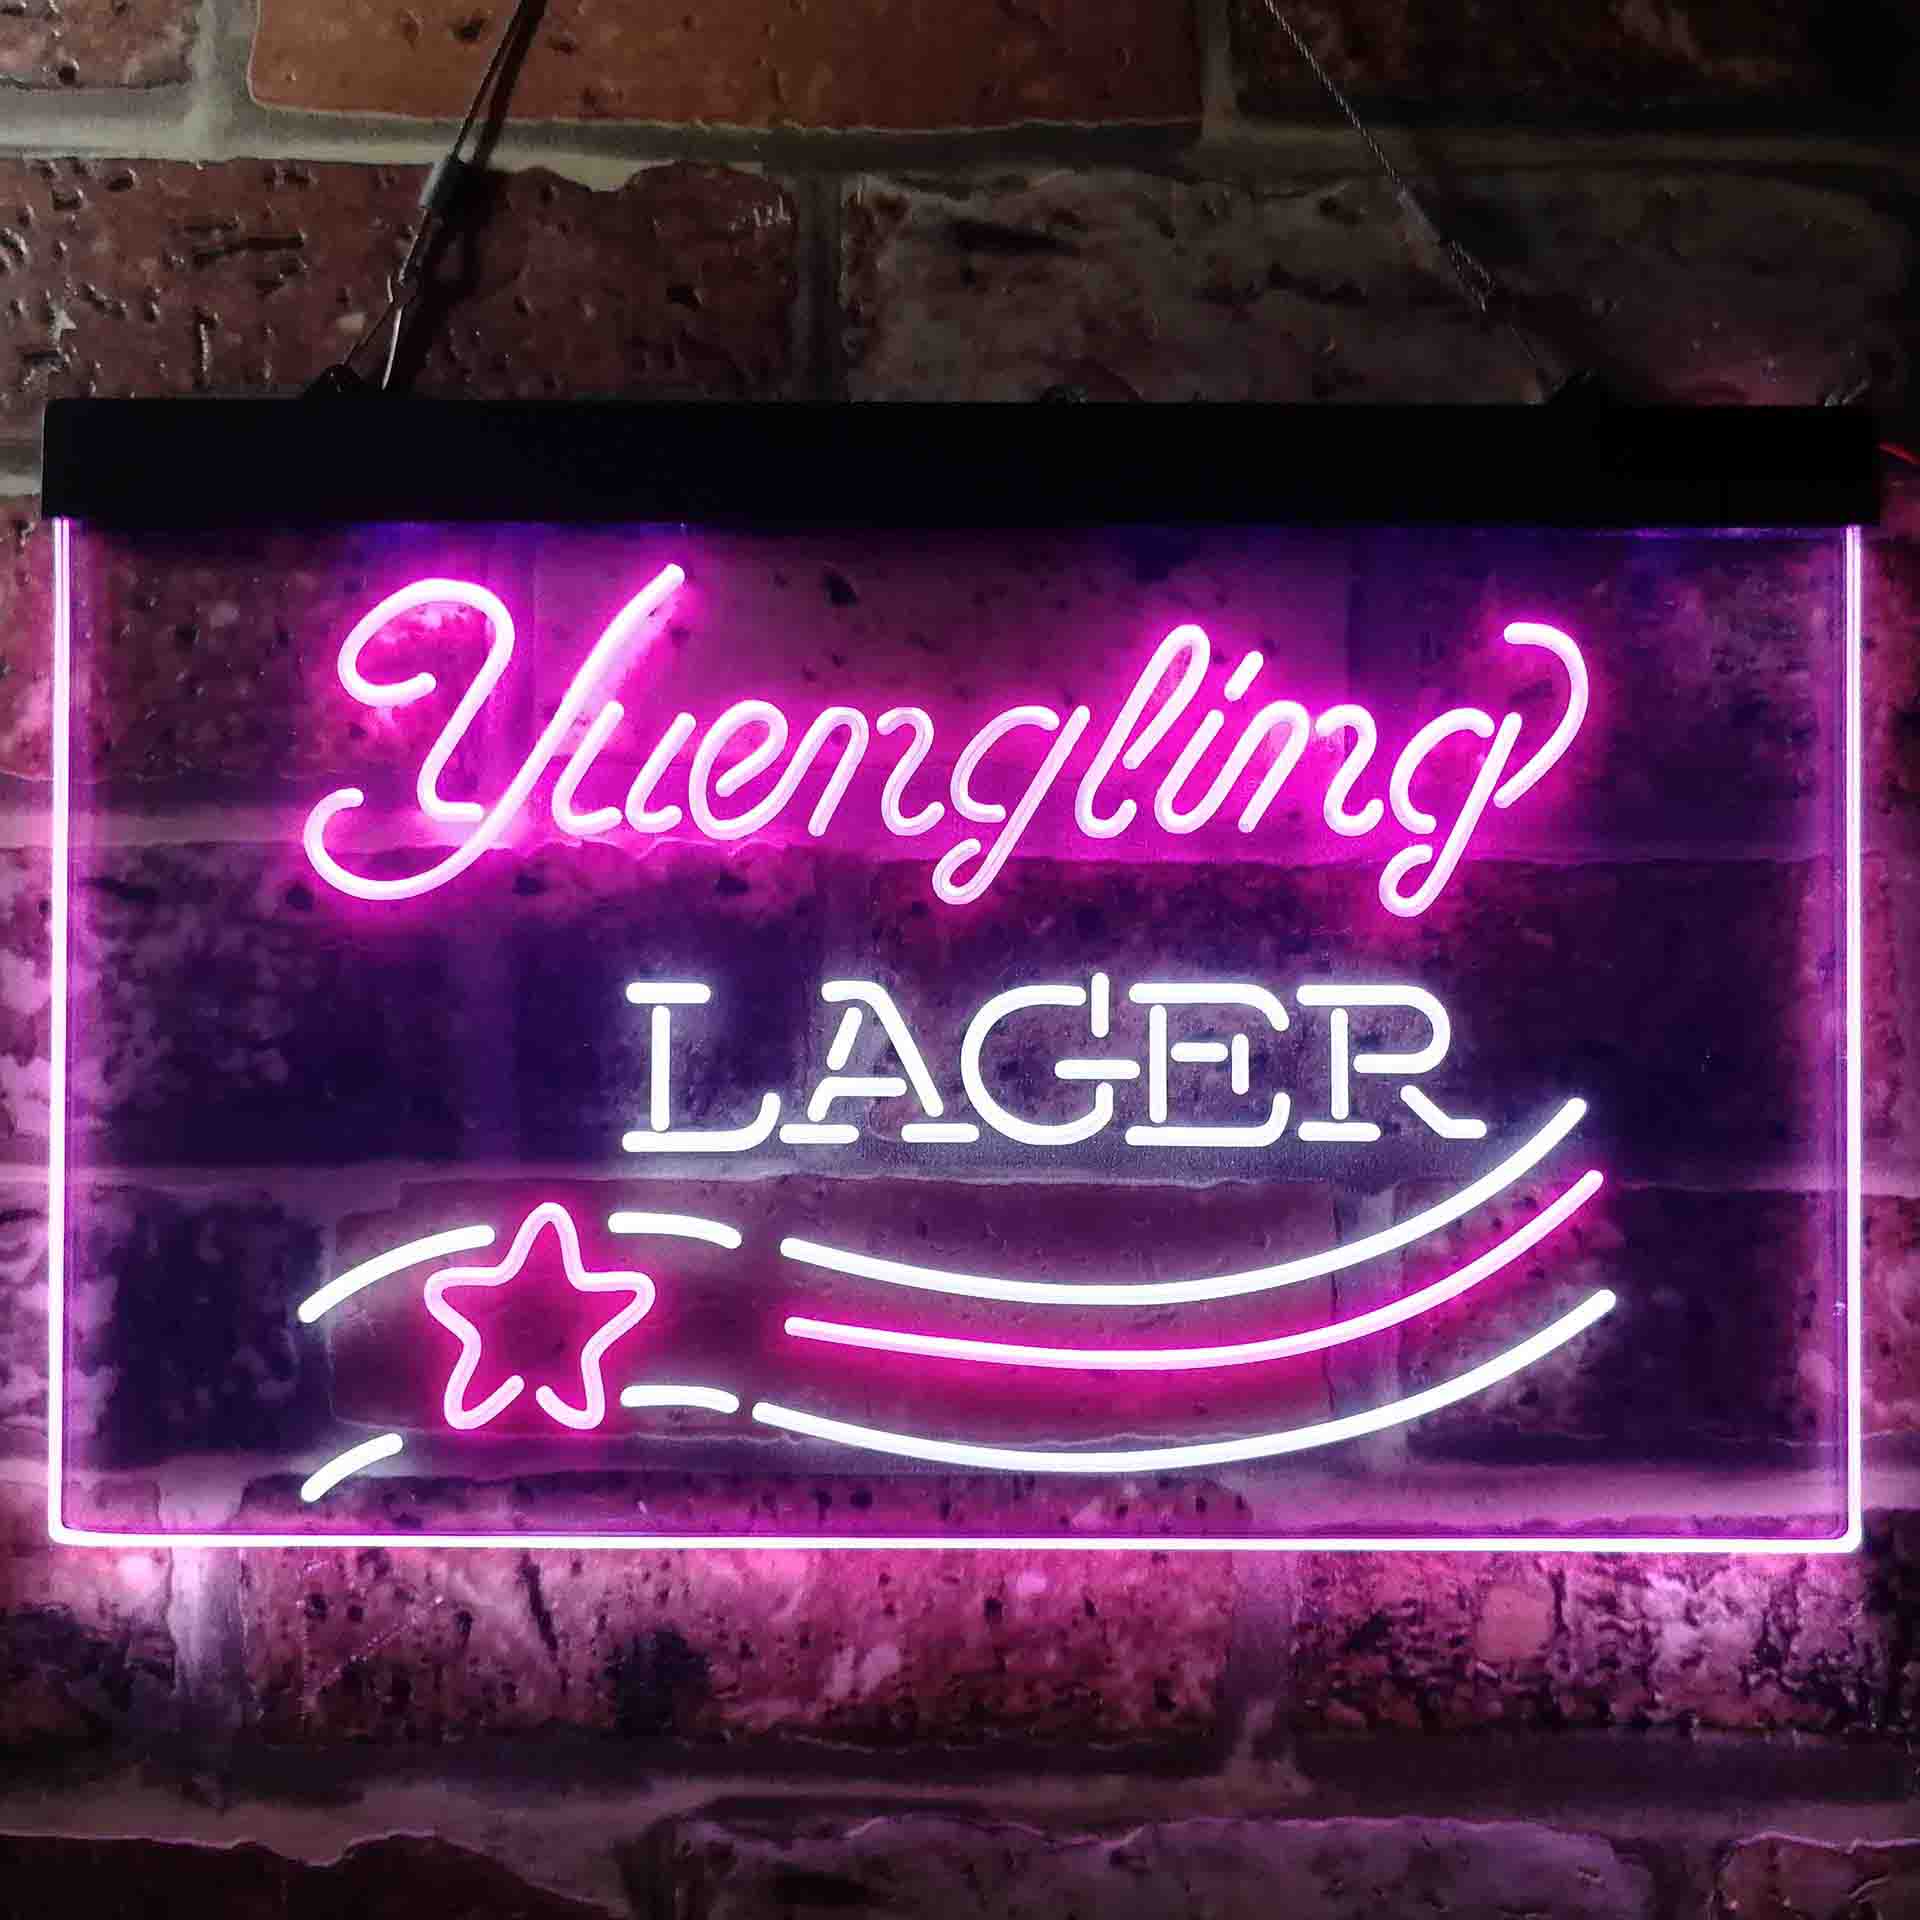 Yuengling Beer Larger Bar Neon-Like LED Sign